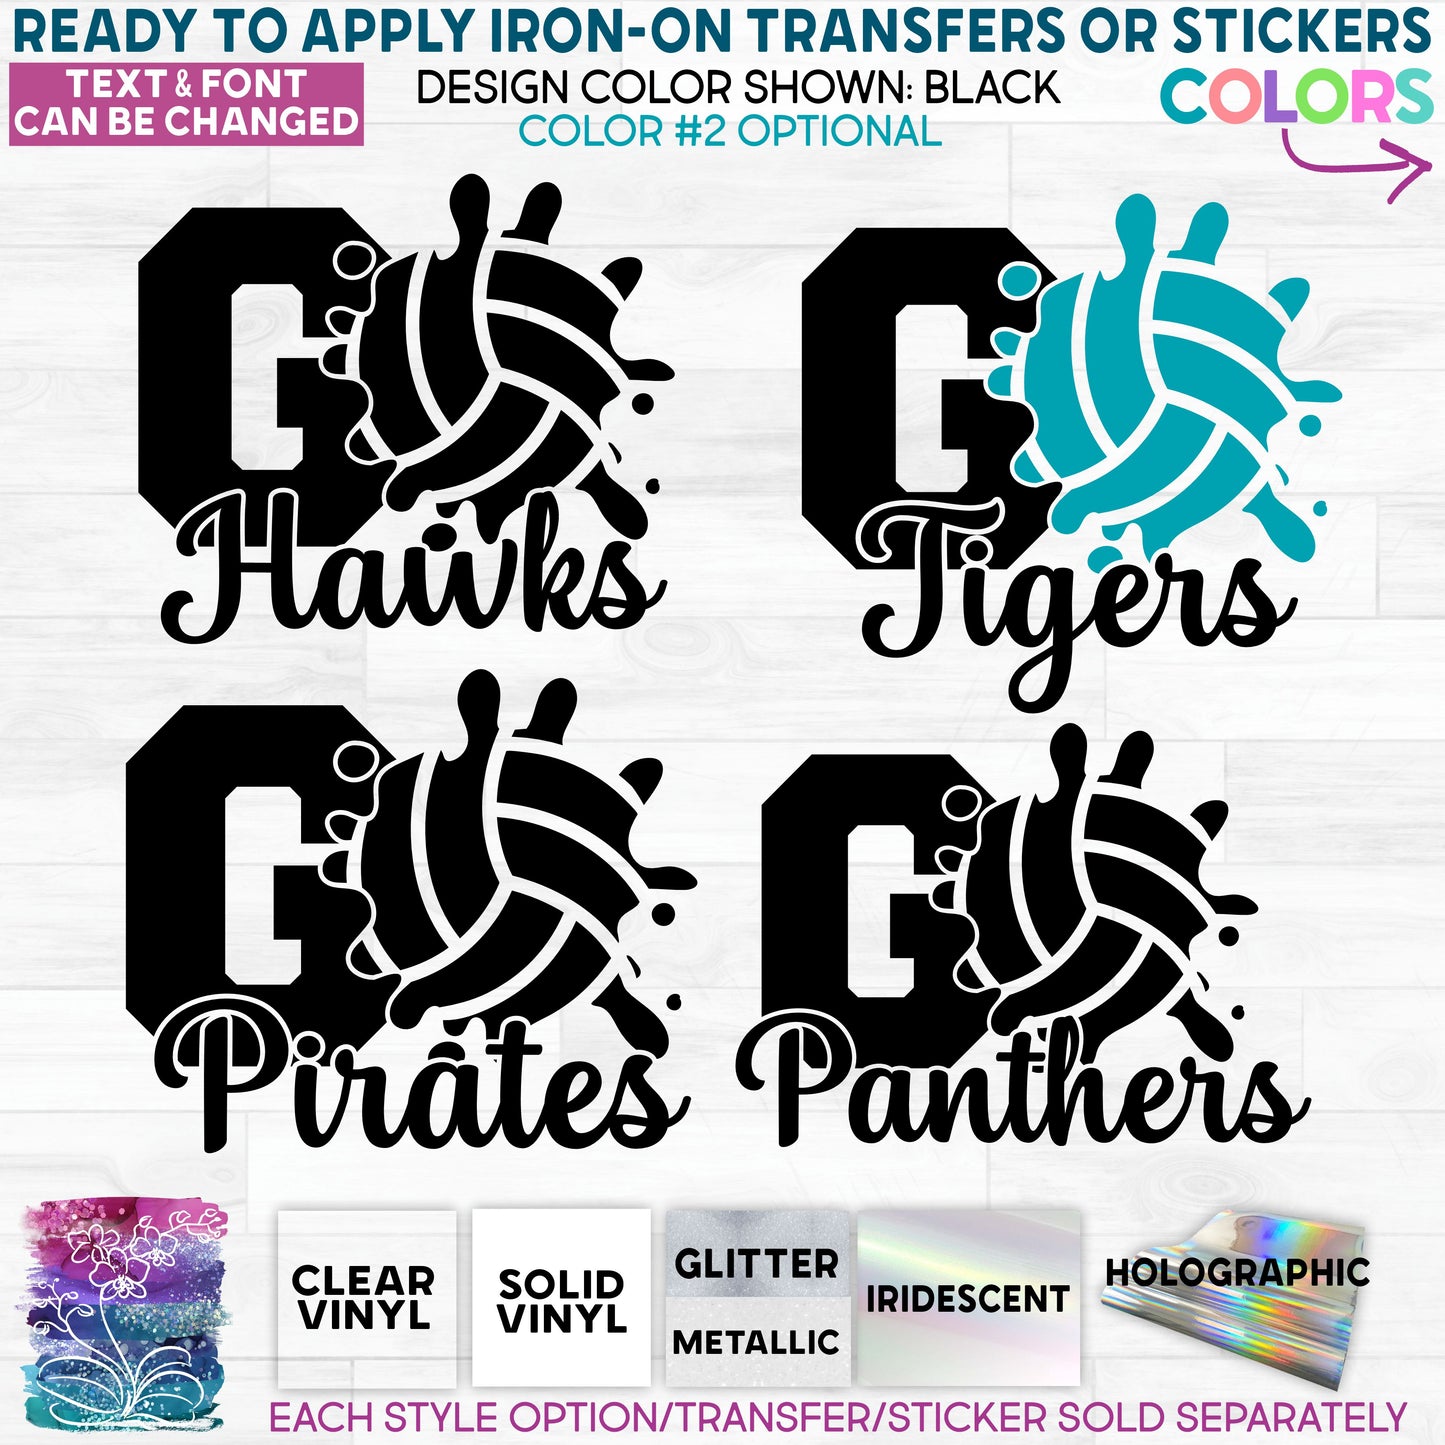 (s334-A3) Go Team Name Volleyball Glitter or Vinyl Iron-On Transfer or Sticker